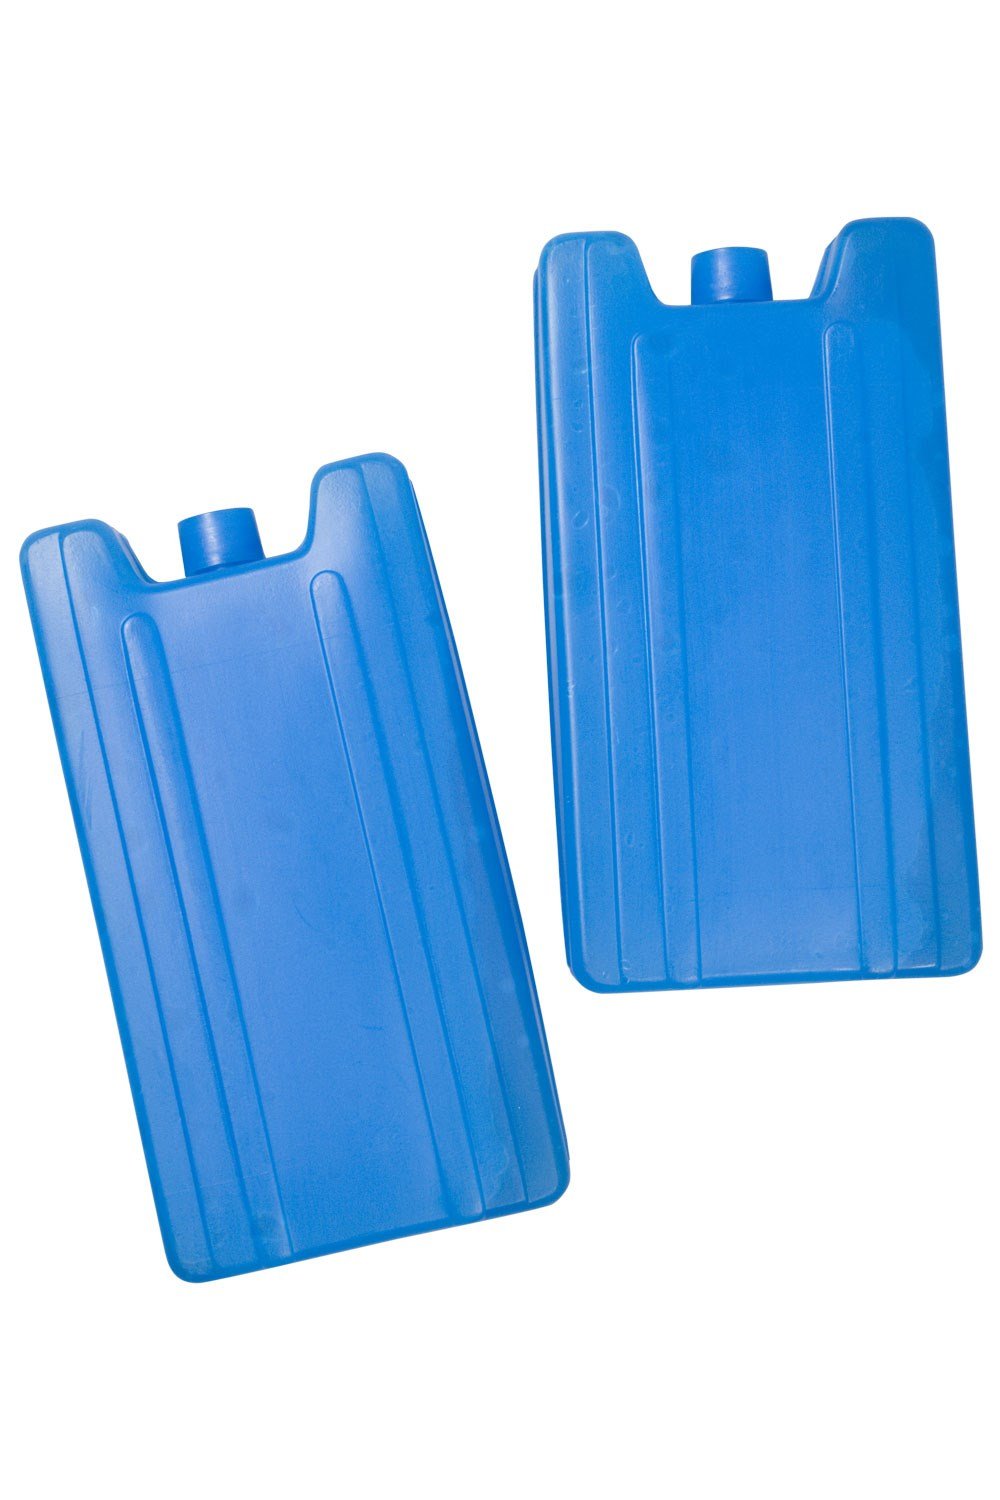 Ice Pack - 2 Pack - Blue